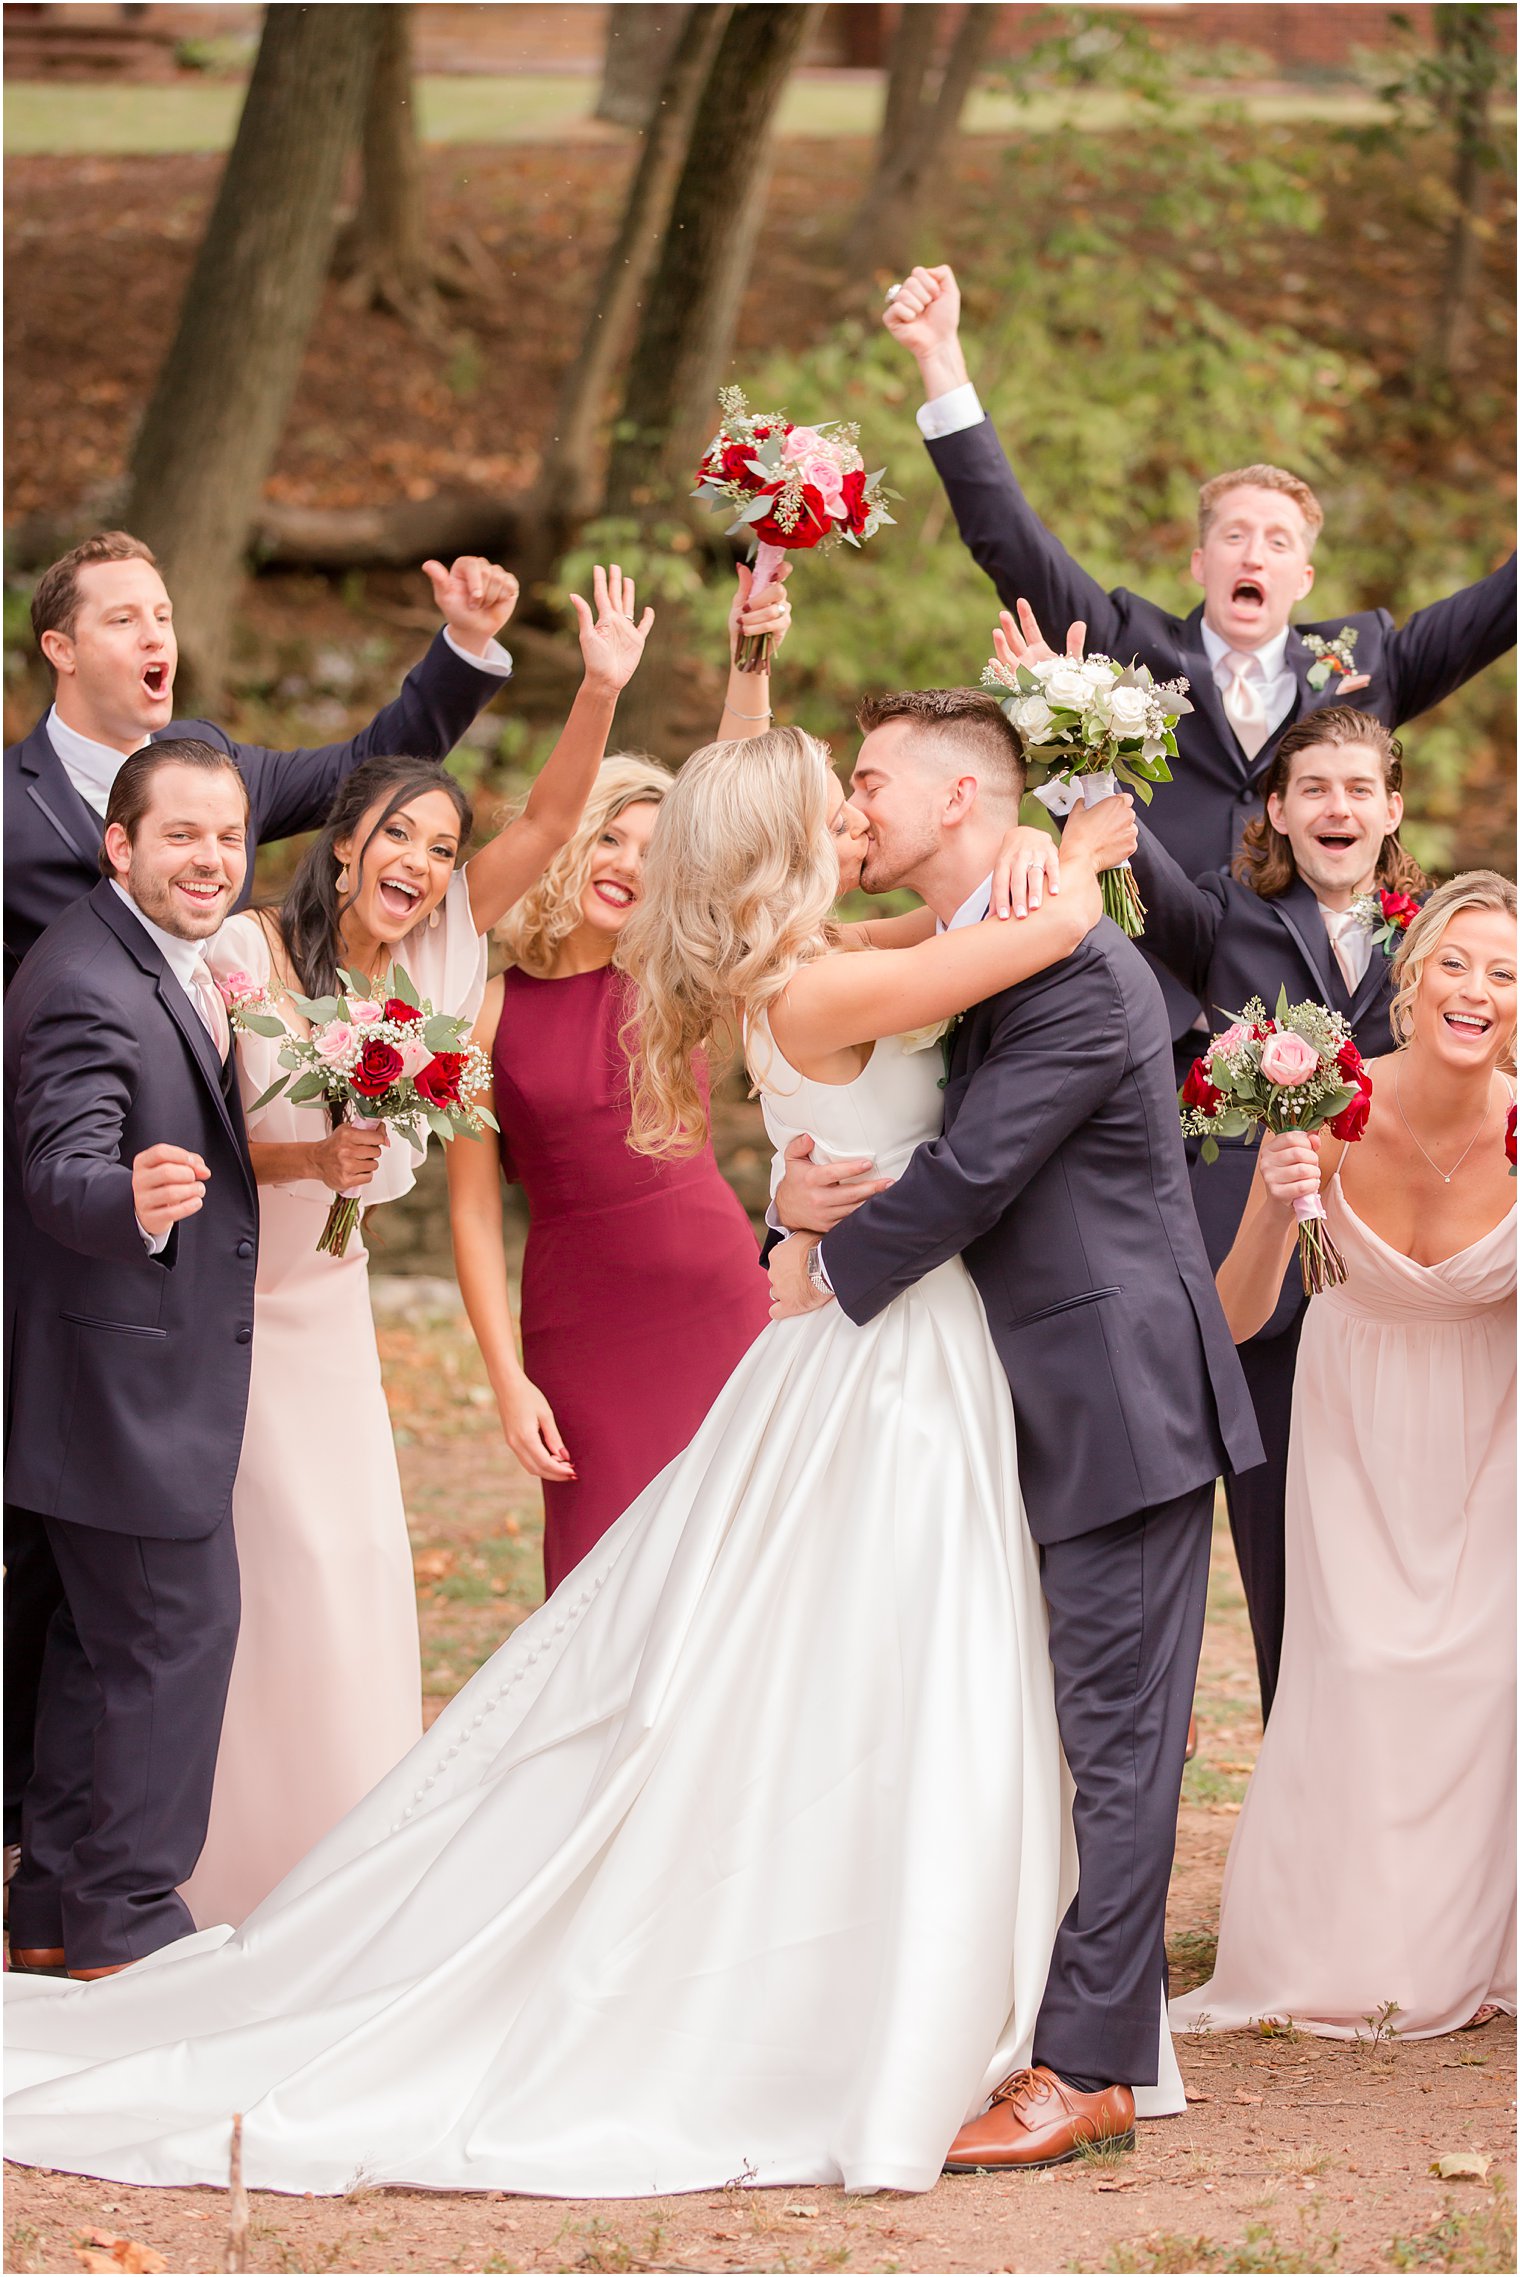 Candid bridal party photo at Westmount Country Club